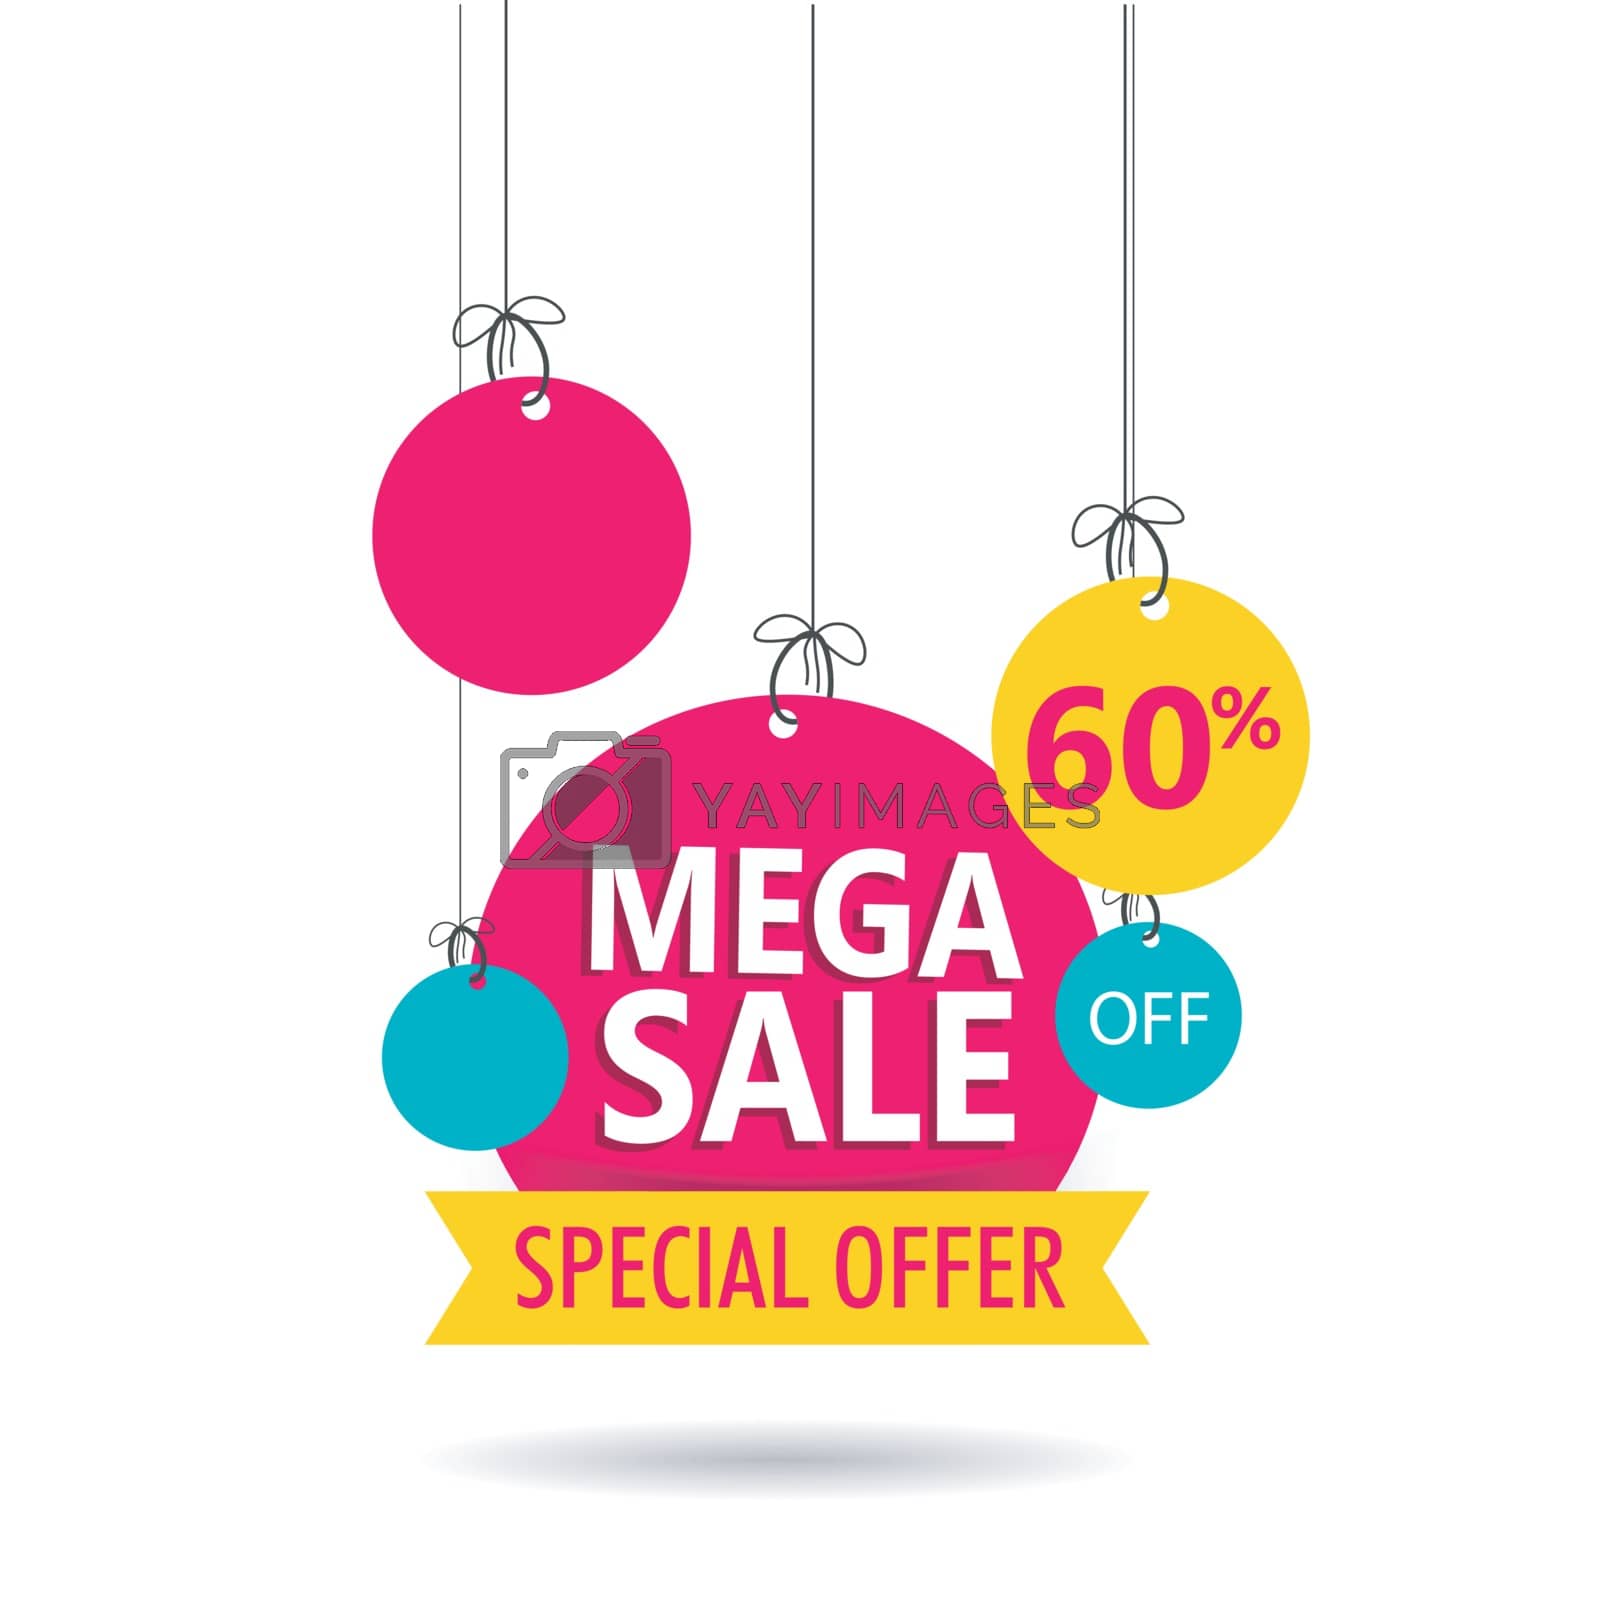 Royalty free image of Mega Sale tag or label with 60% discount offer on white backgrou by aispl